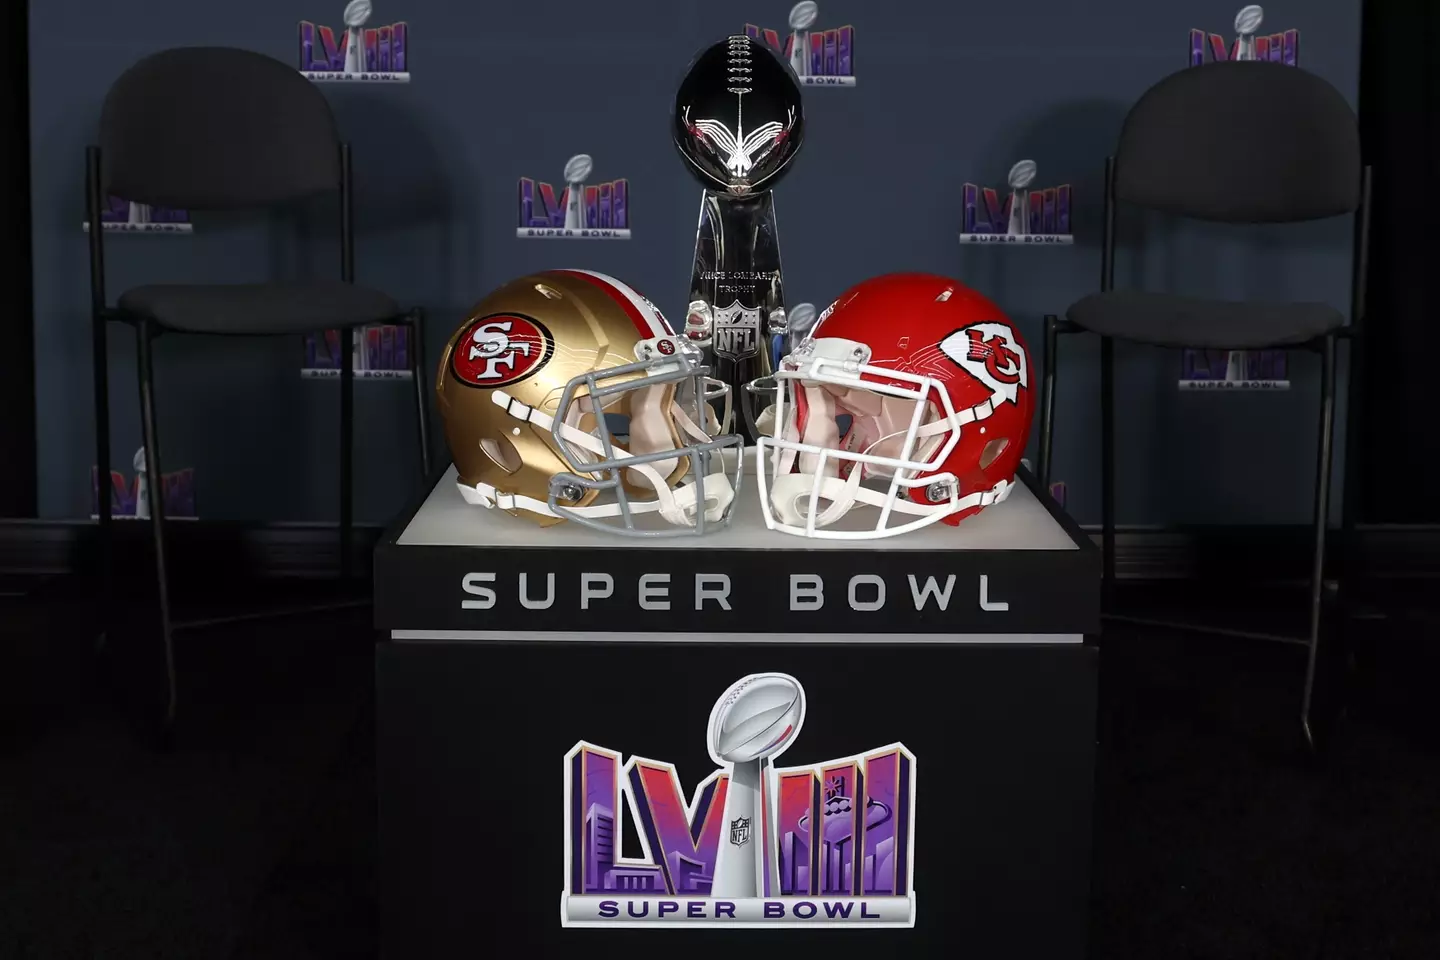 The Super Bowl takes place this Sunday.